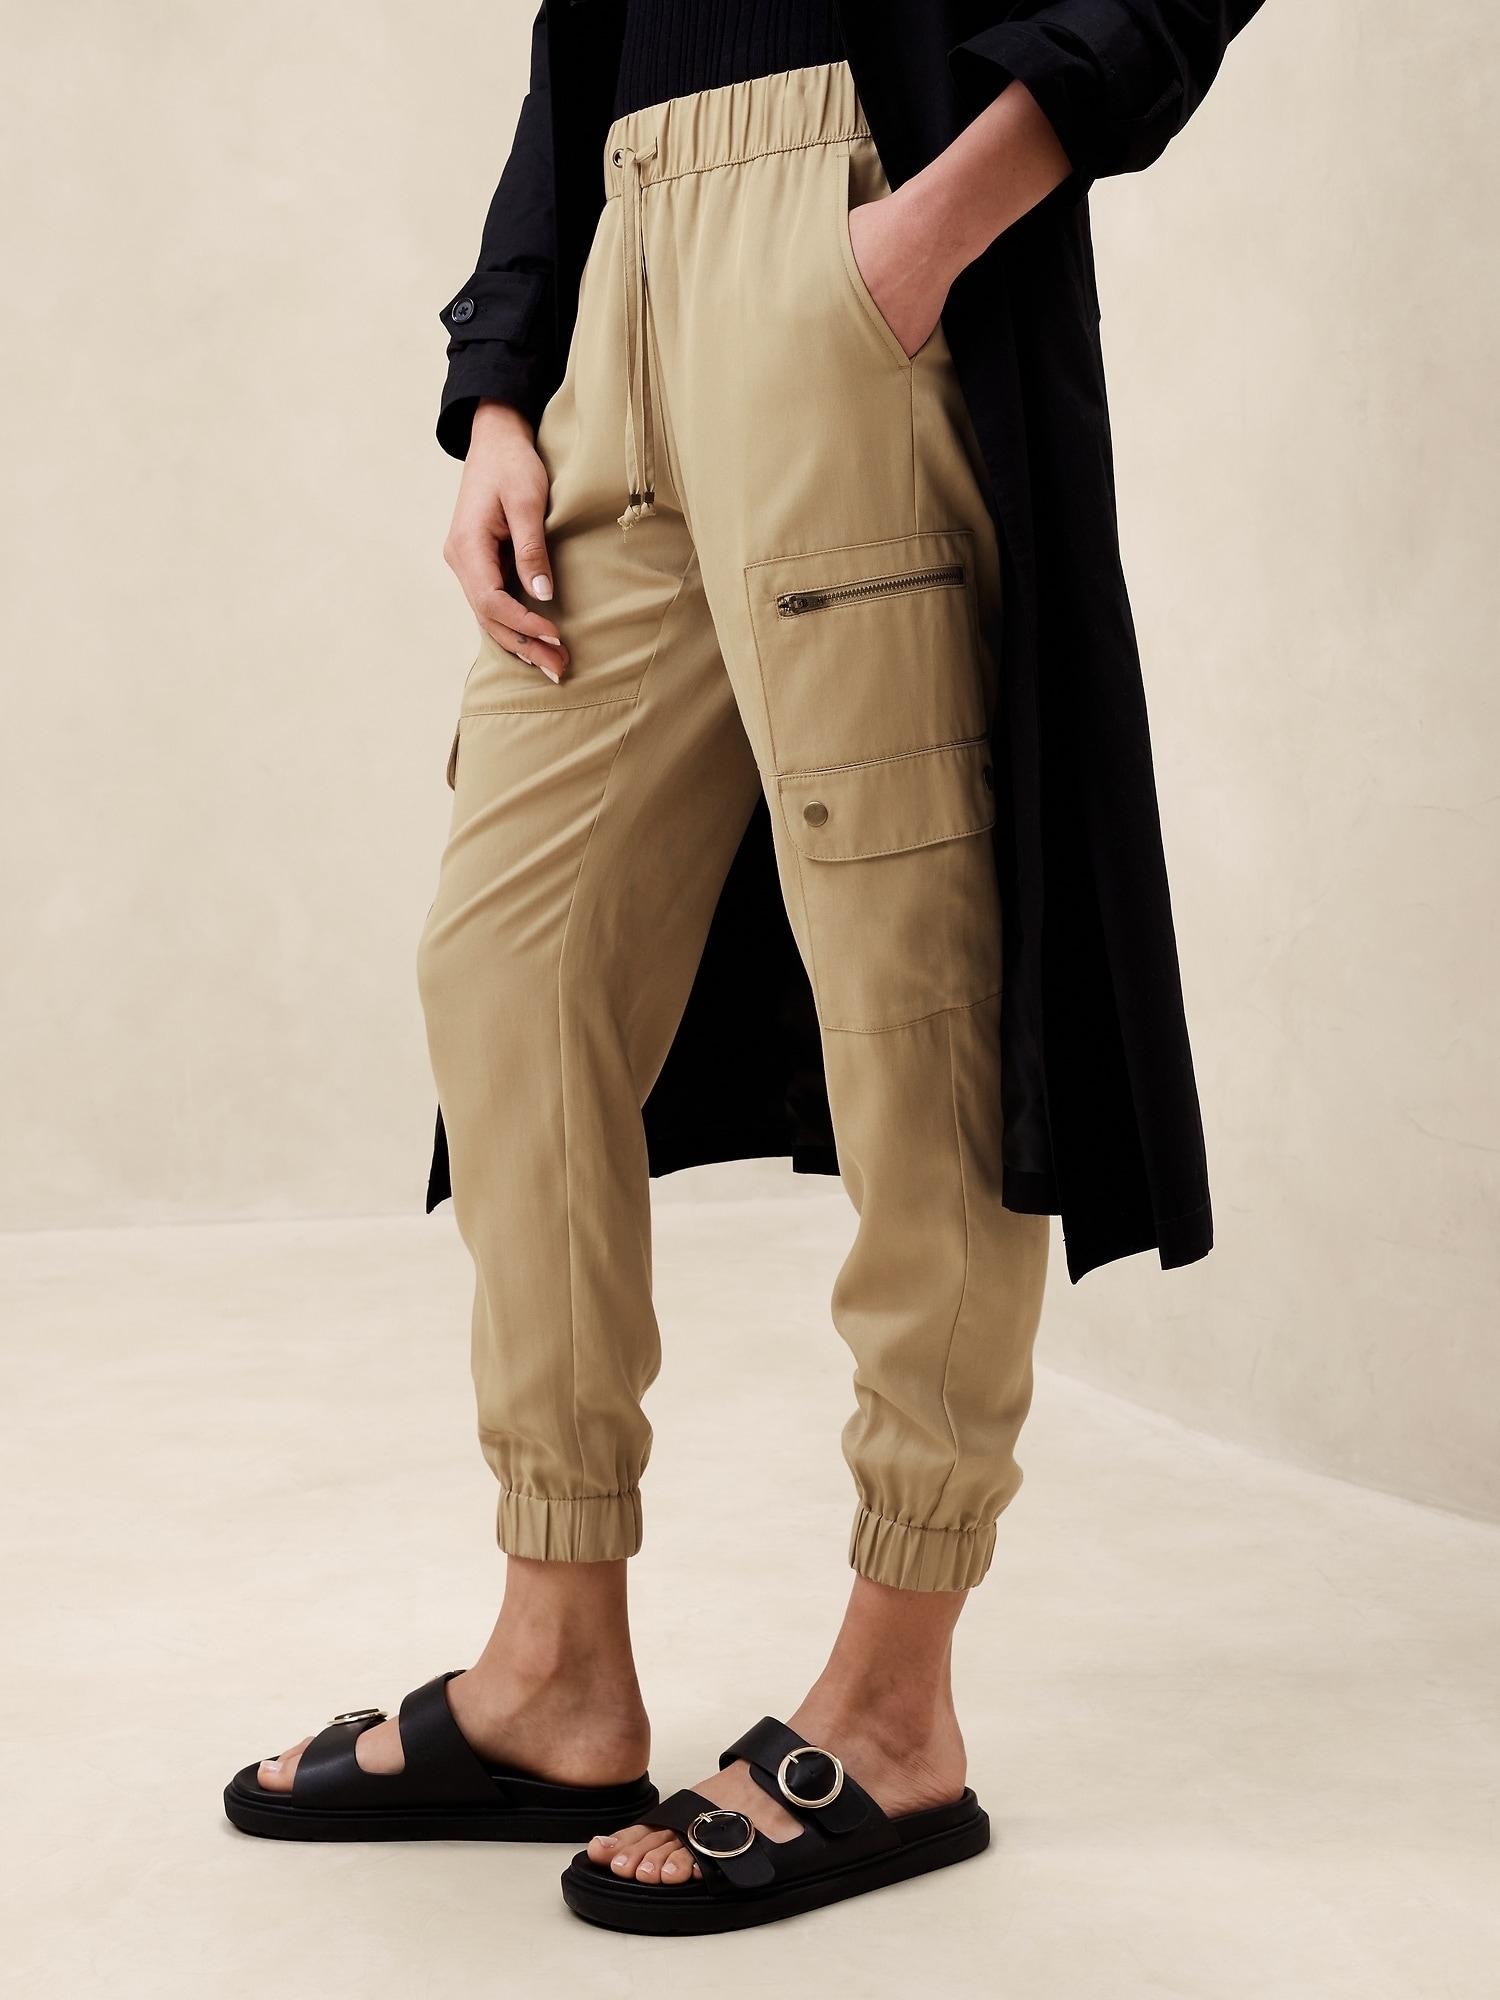 Person wearing khaki cargo pants and black slide sandals